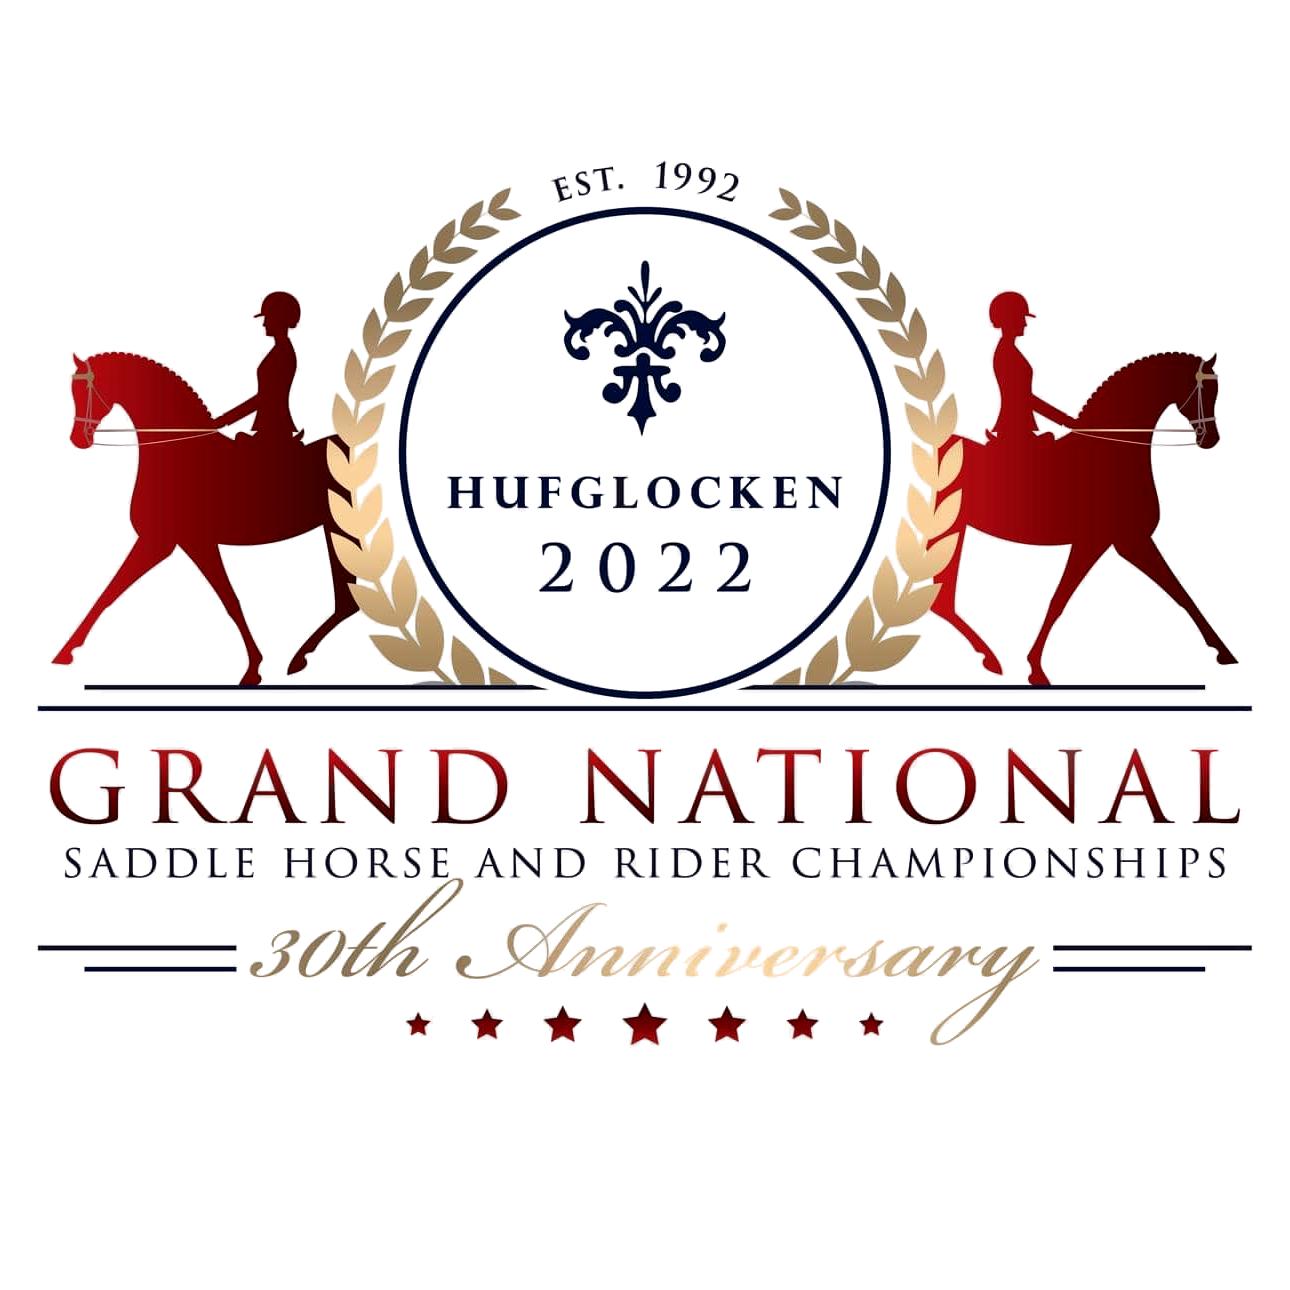 2022 SHC Hufglocken Saddle horse and rider Championships is here!